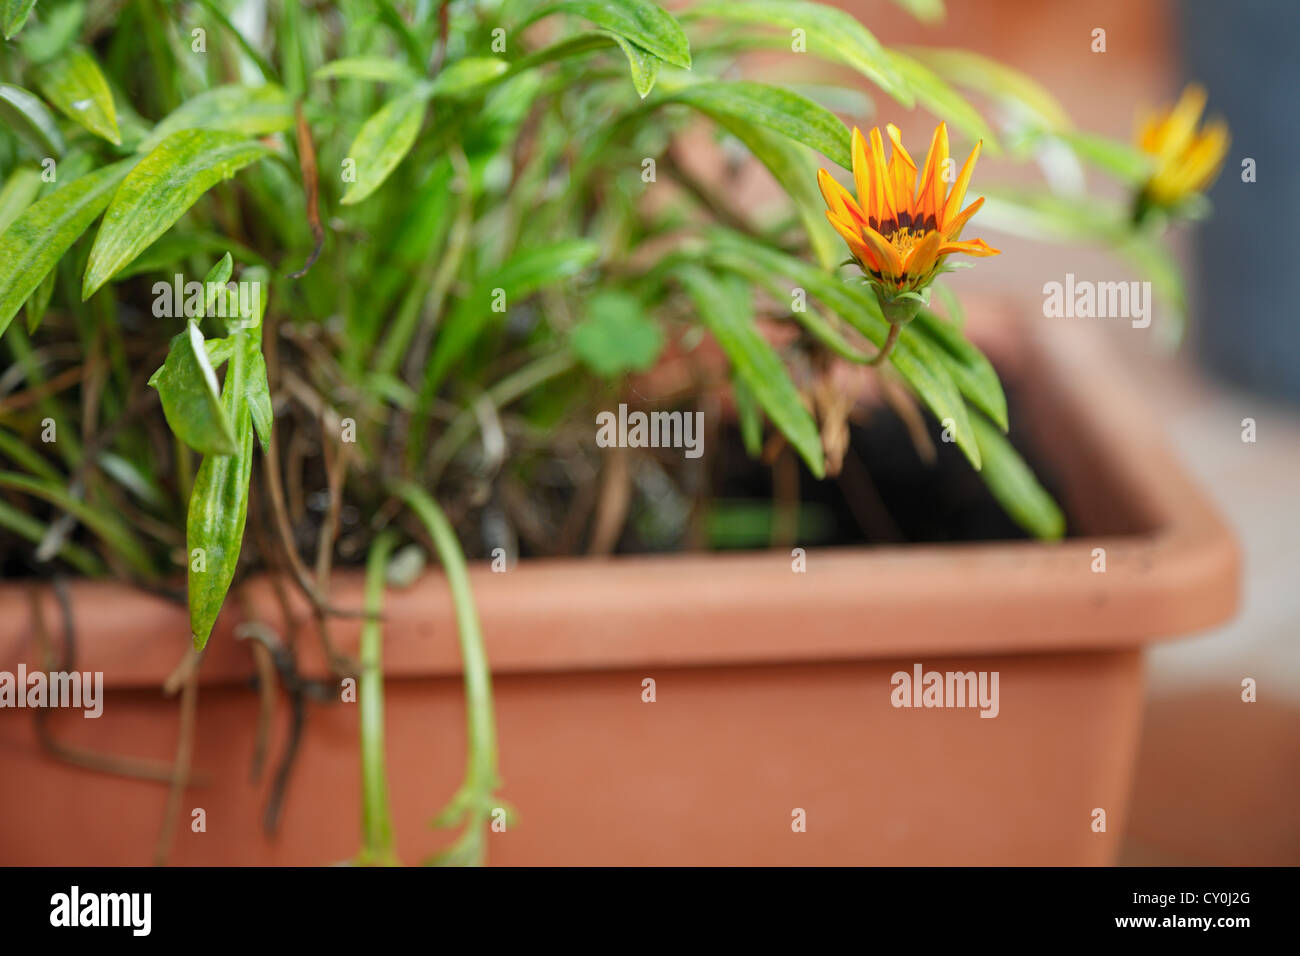 Potted Plant of daisies Stock Photo